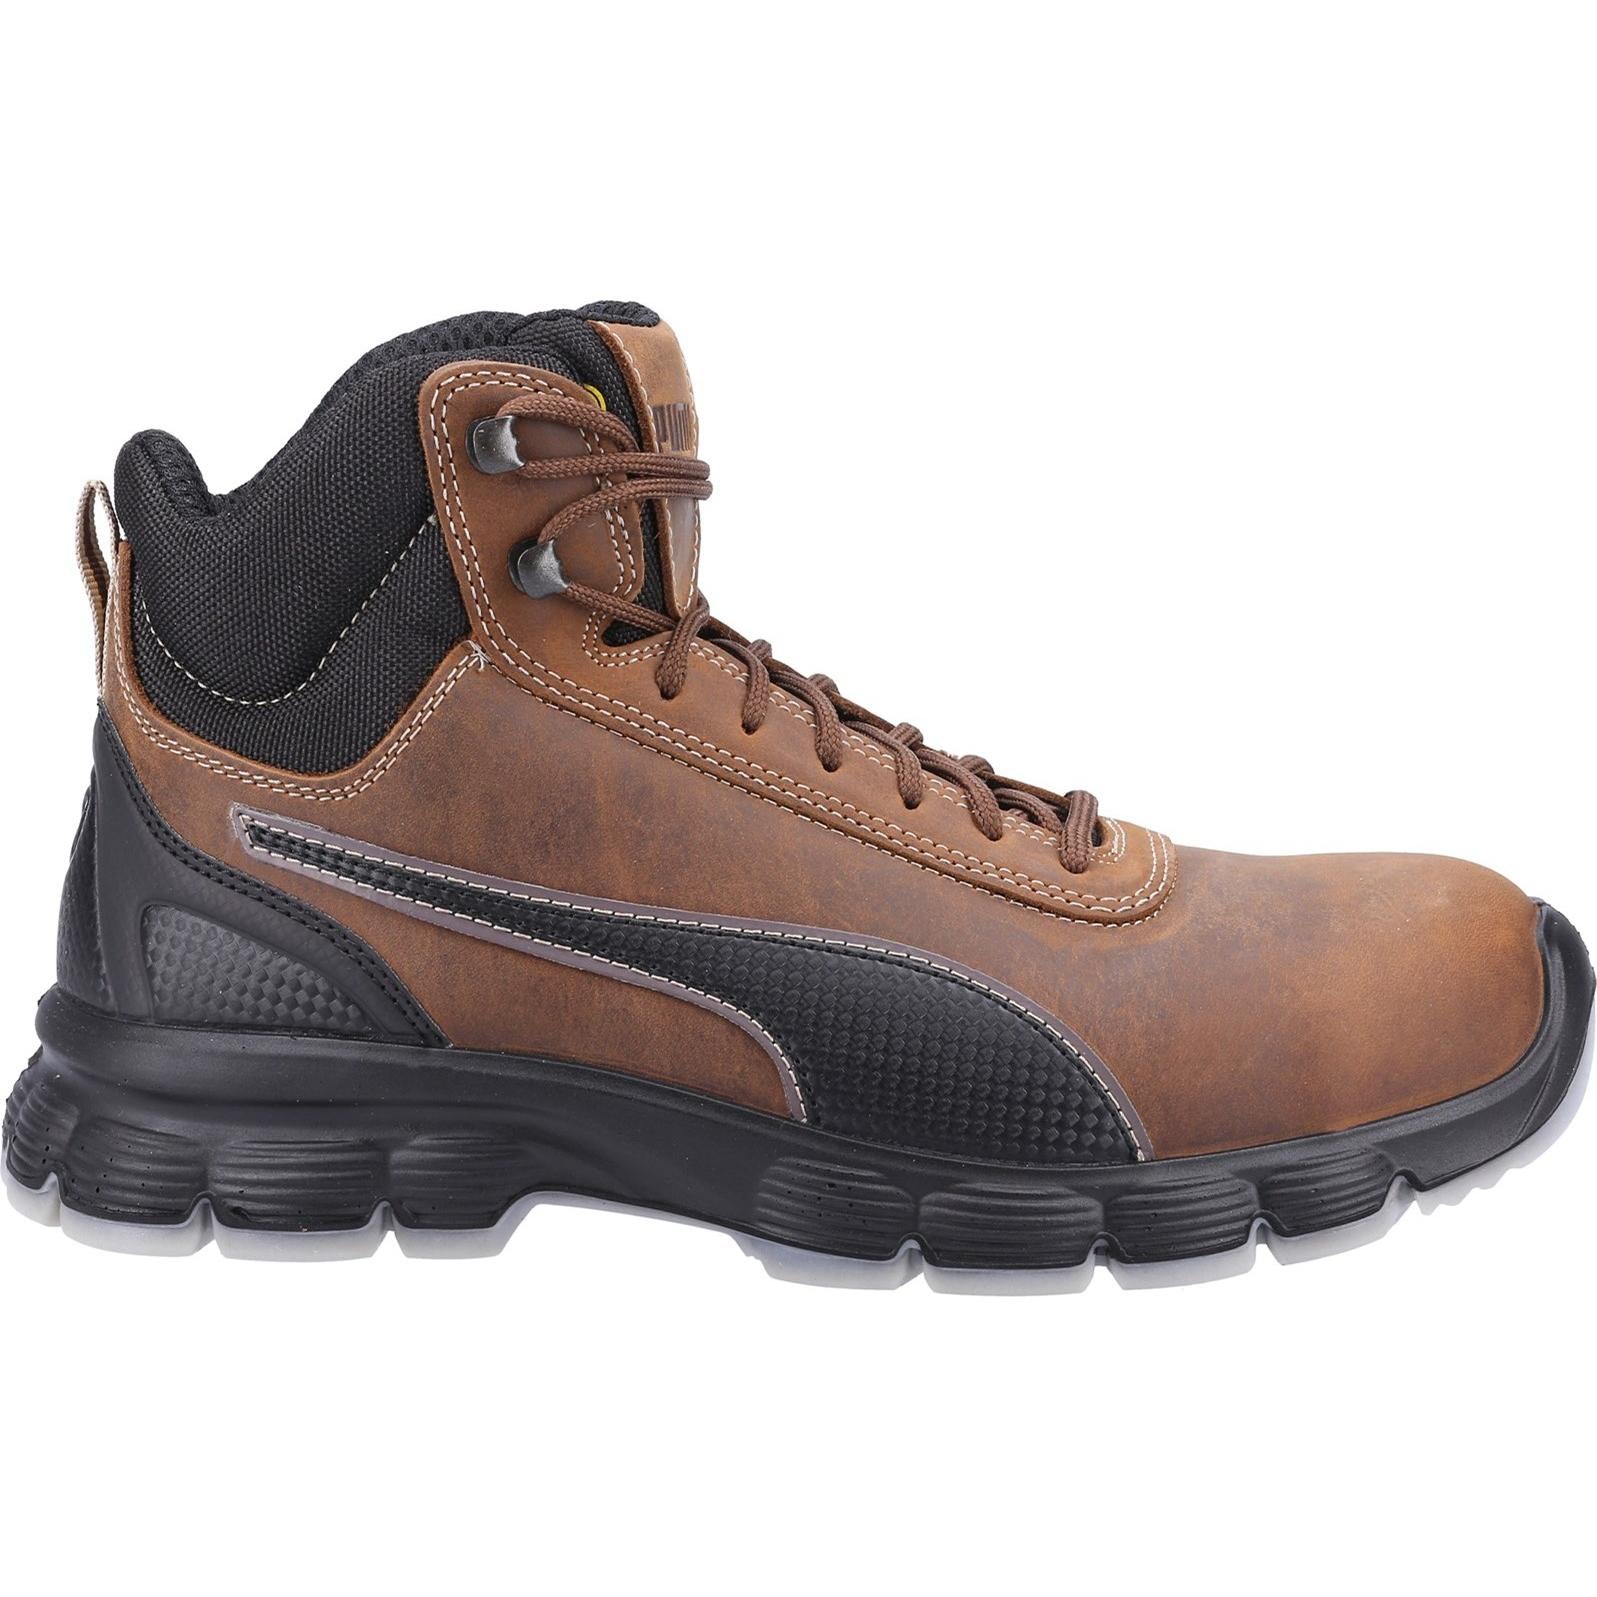 Puma Safety Condor Mid Safety Boot